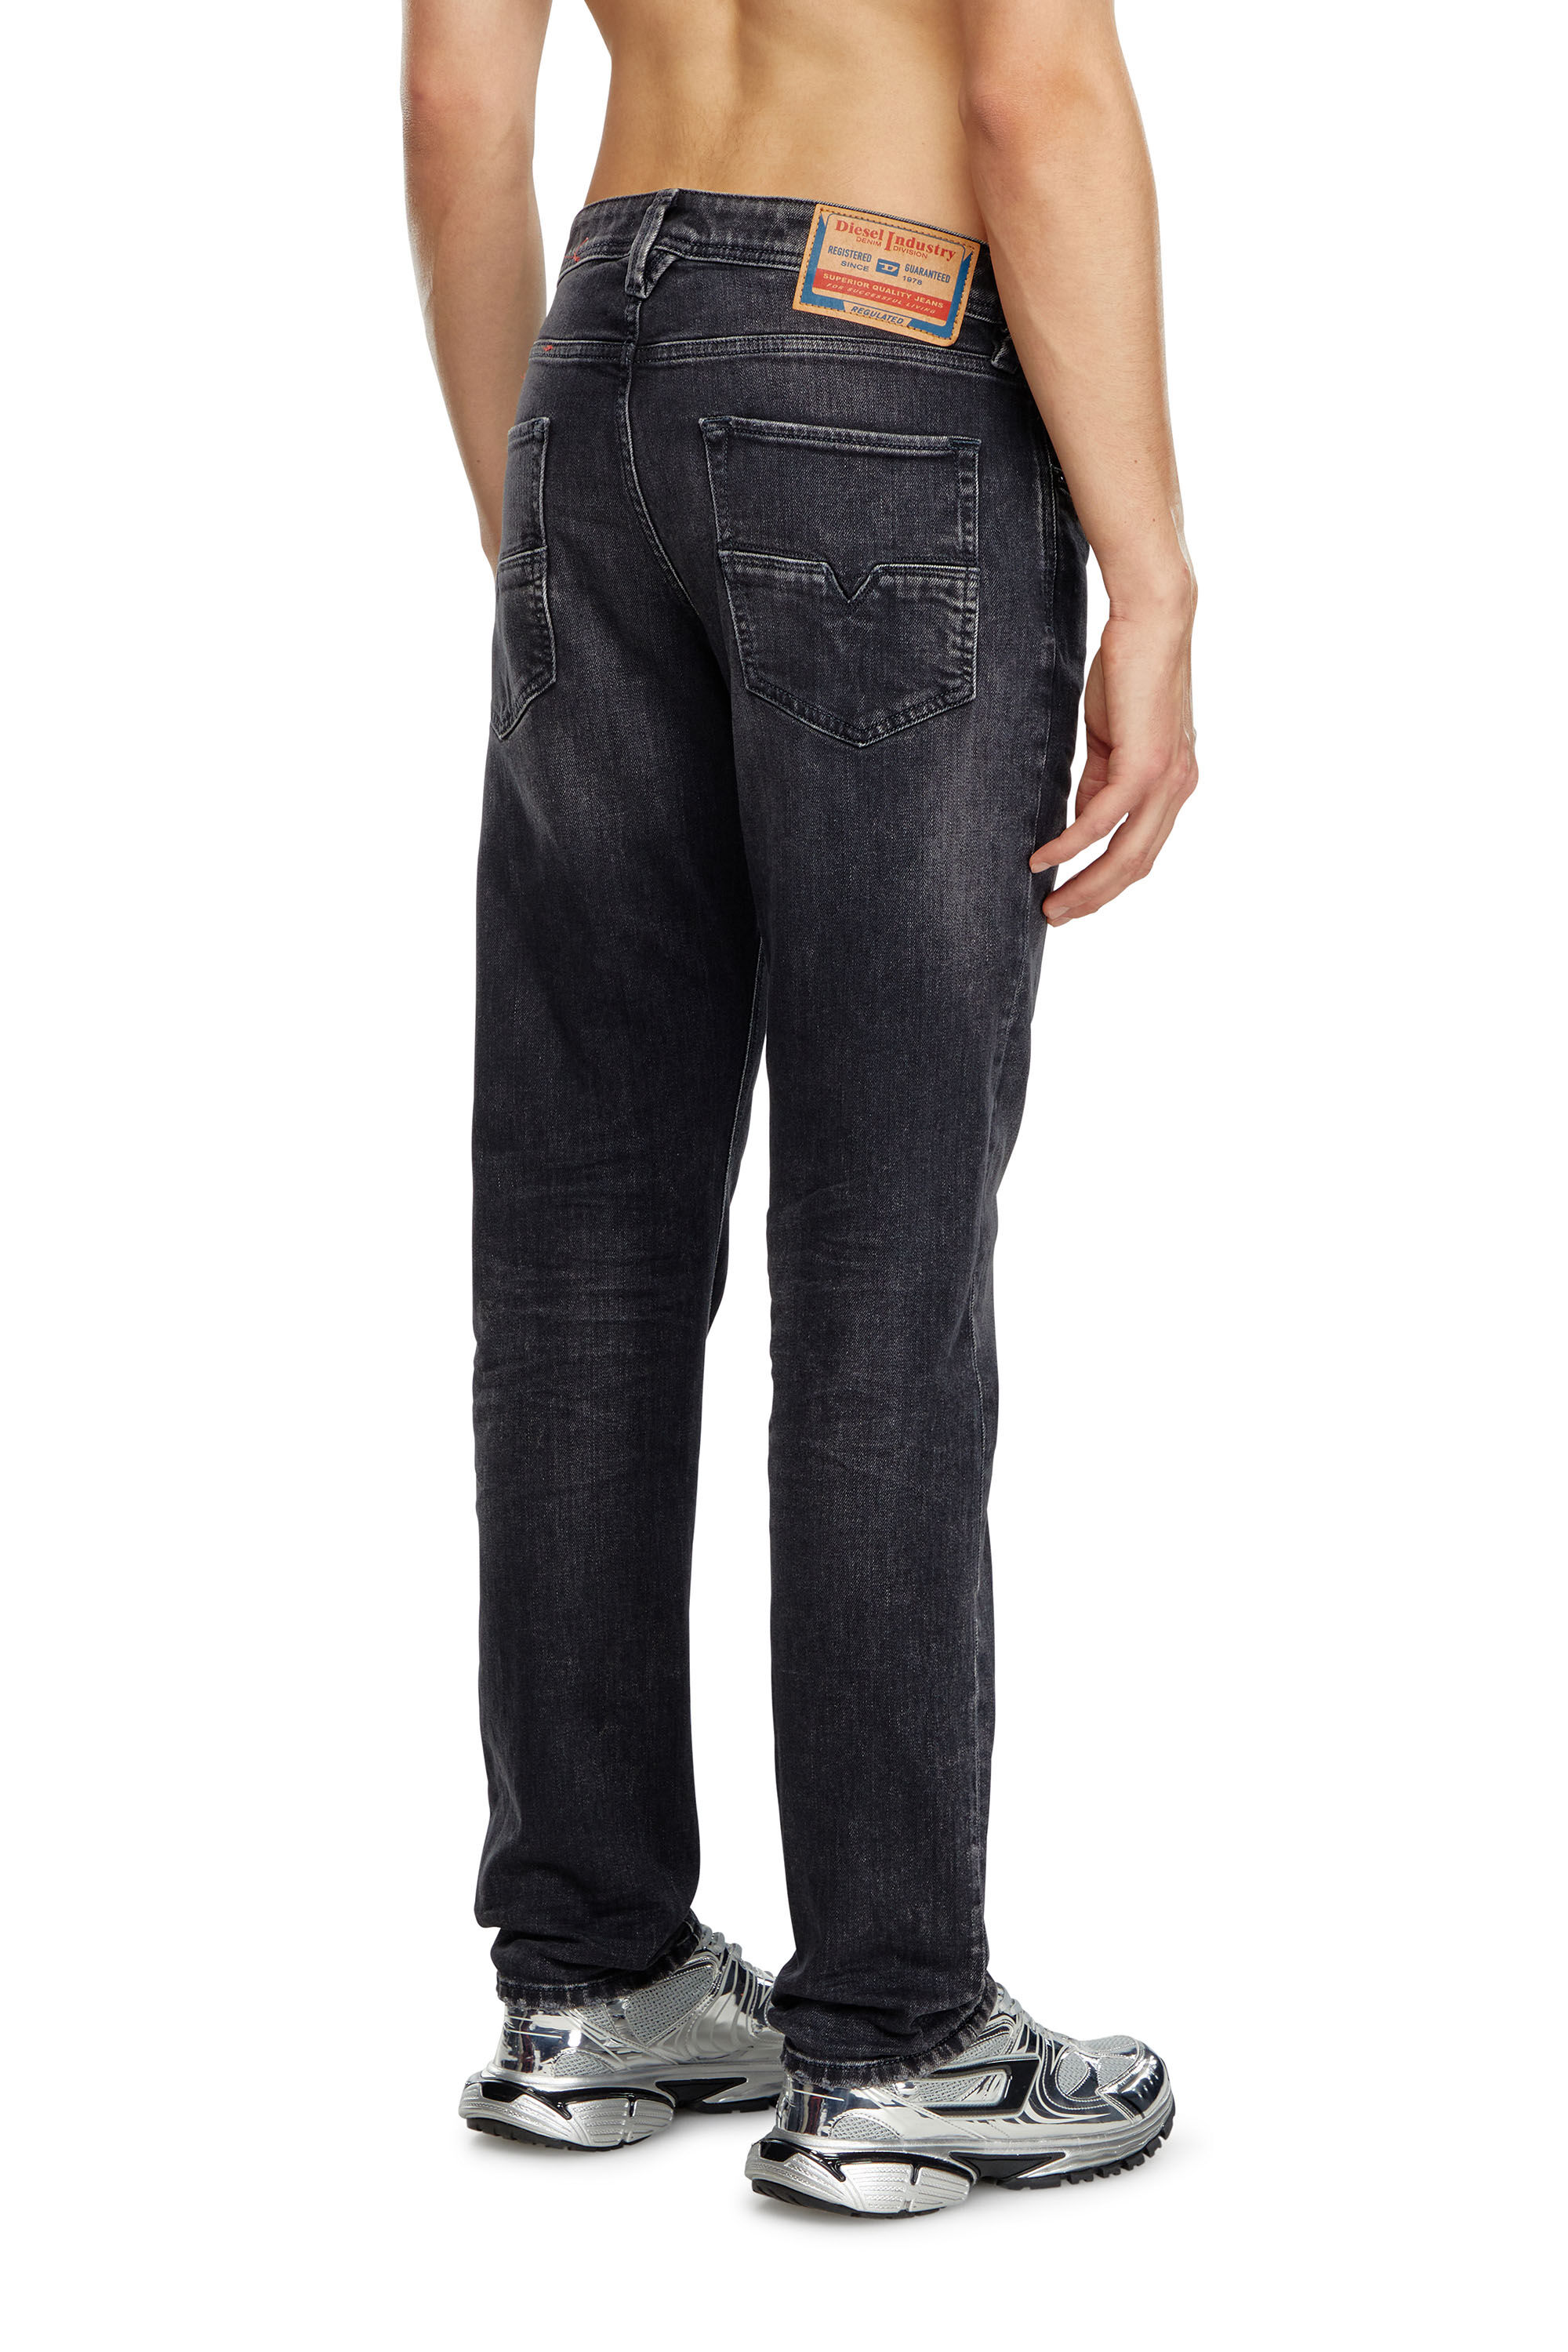 Diesel - Tapered Jeans 1986 Larkee-Beex 09K51, Hombre Tapered Jeans - 1986 Larkee-Beex in Negro - Image 4